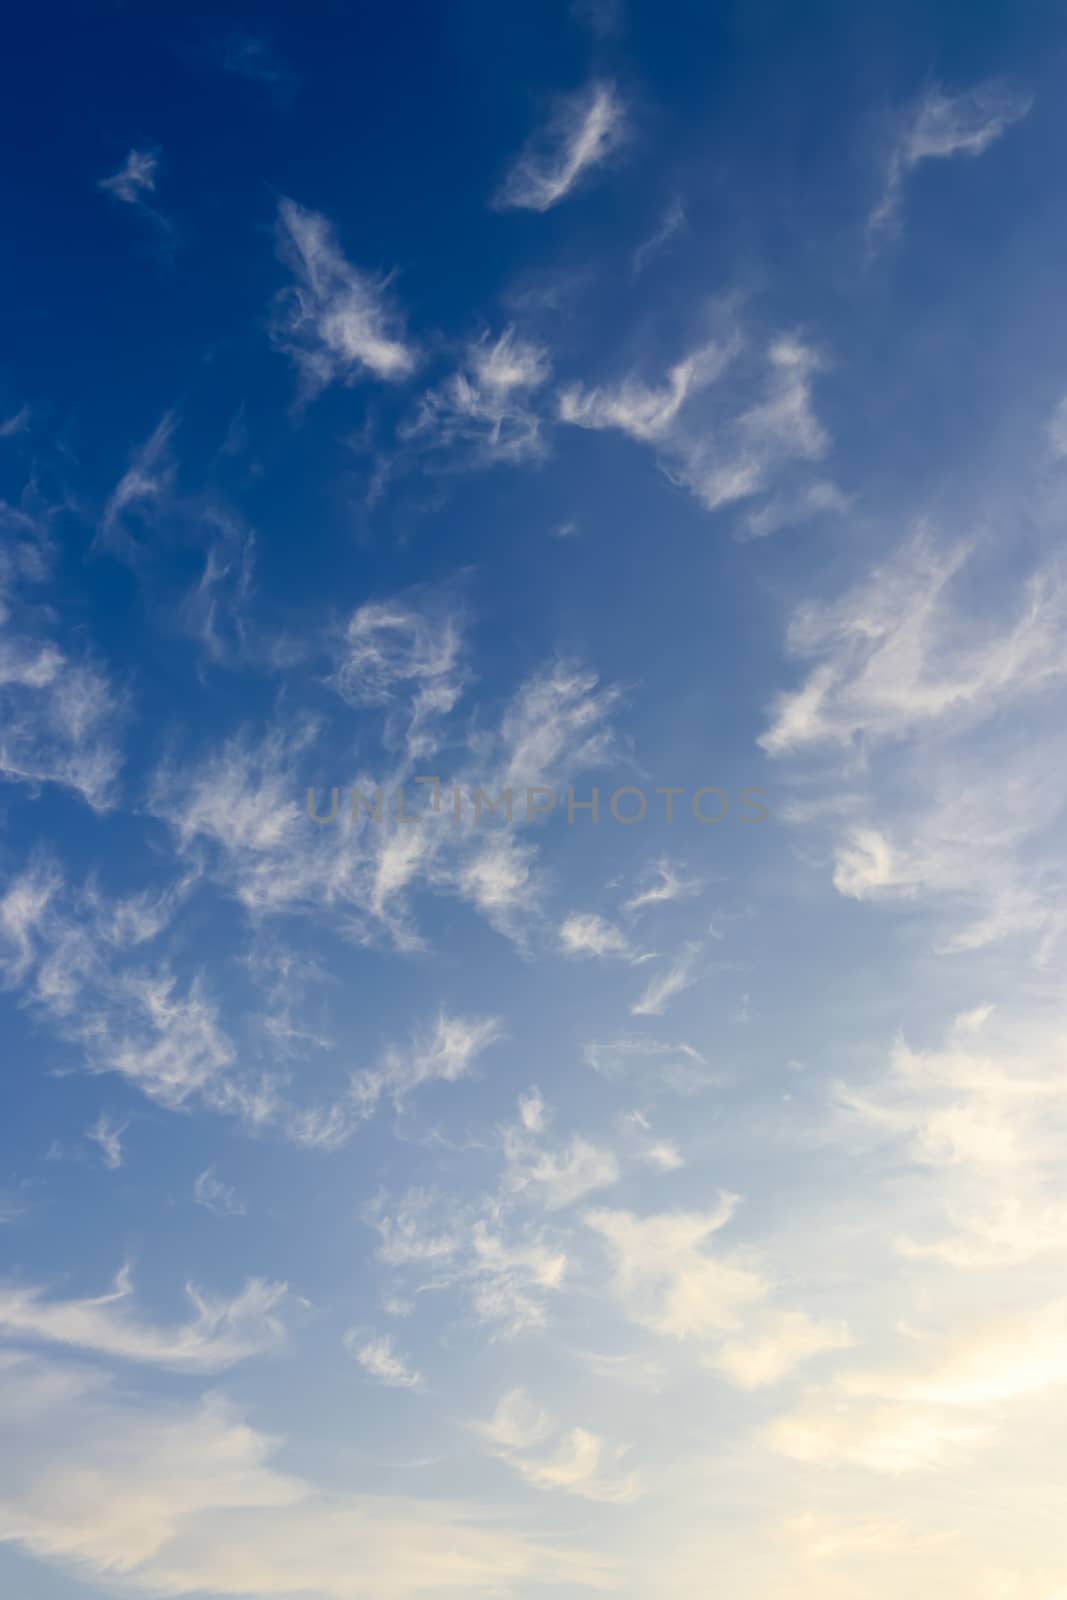 Bright blue sky with feather clouds lit by the daytime sun. Abstract background.